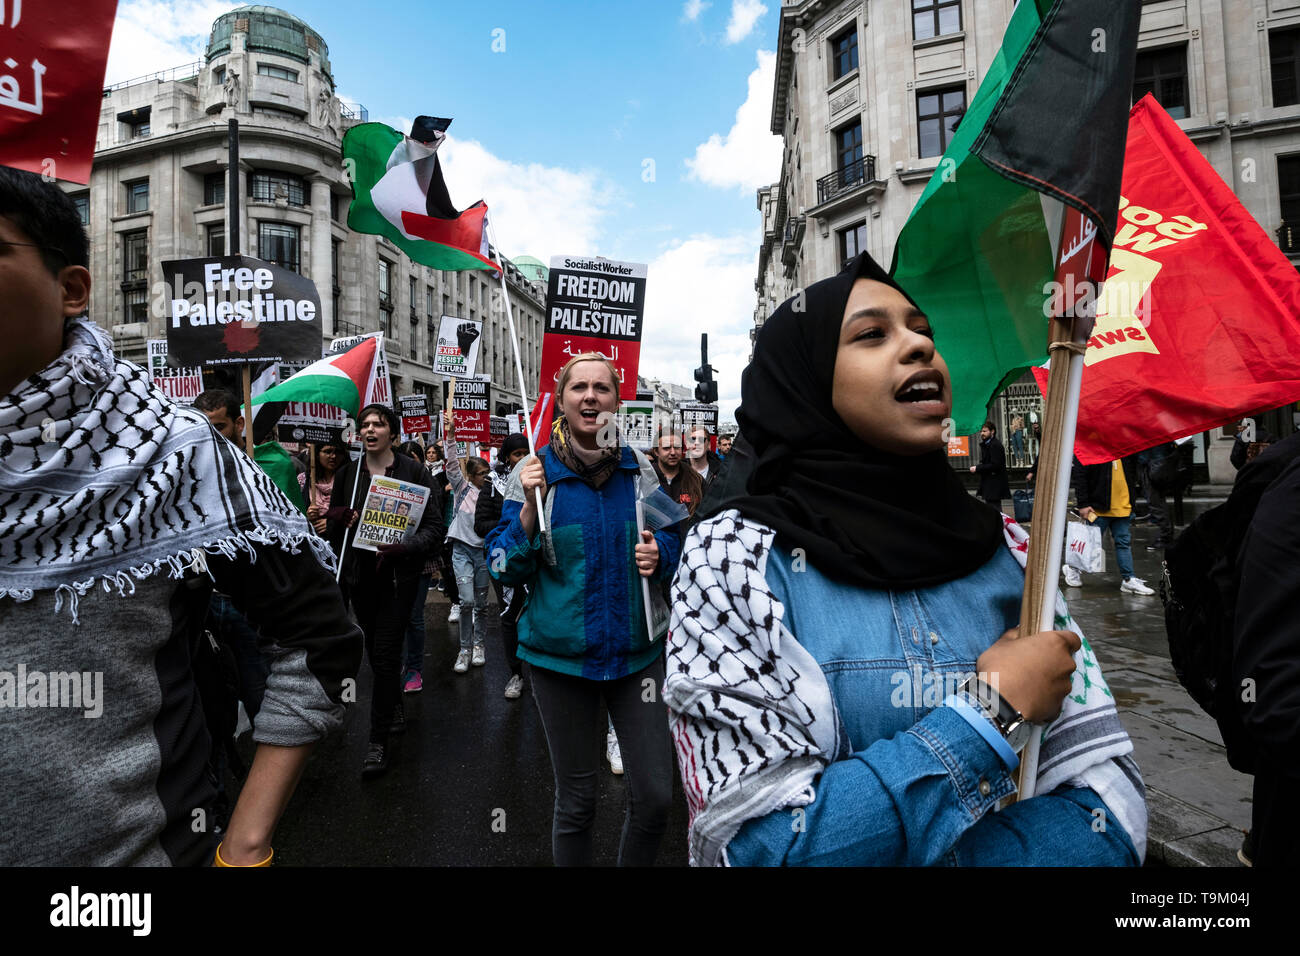 Palestinian Demonstration and rally through central London a few days before Nakba Day. The protest was calling for an end to Israeli oppression  and siege of Gaza and justice and recognition of Palestinian rights including their right to return. They asked people to boycott of Israel and send donations for medical aid for Palestine. London May 11 2019 Stock Photo